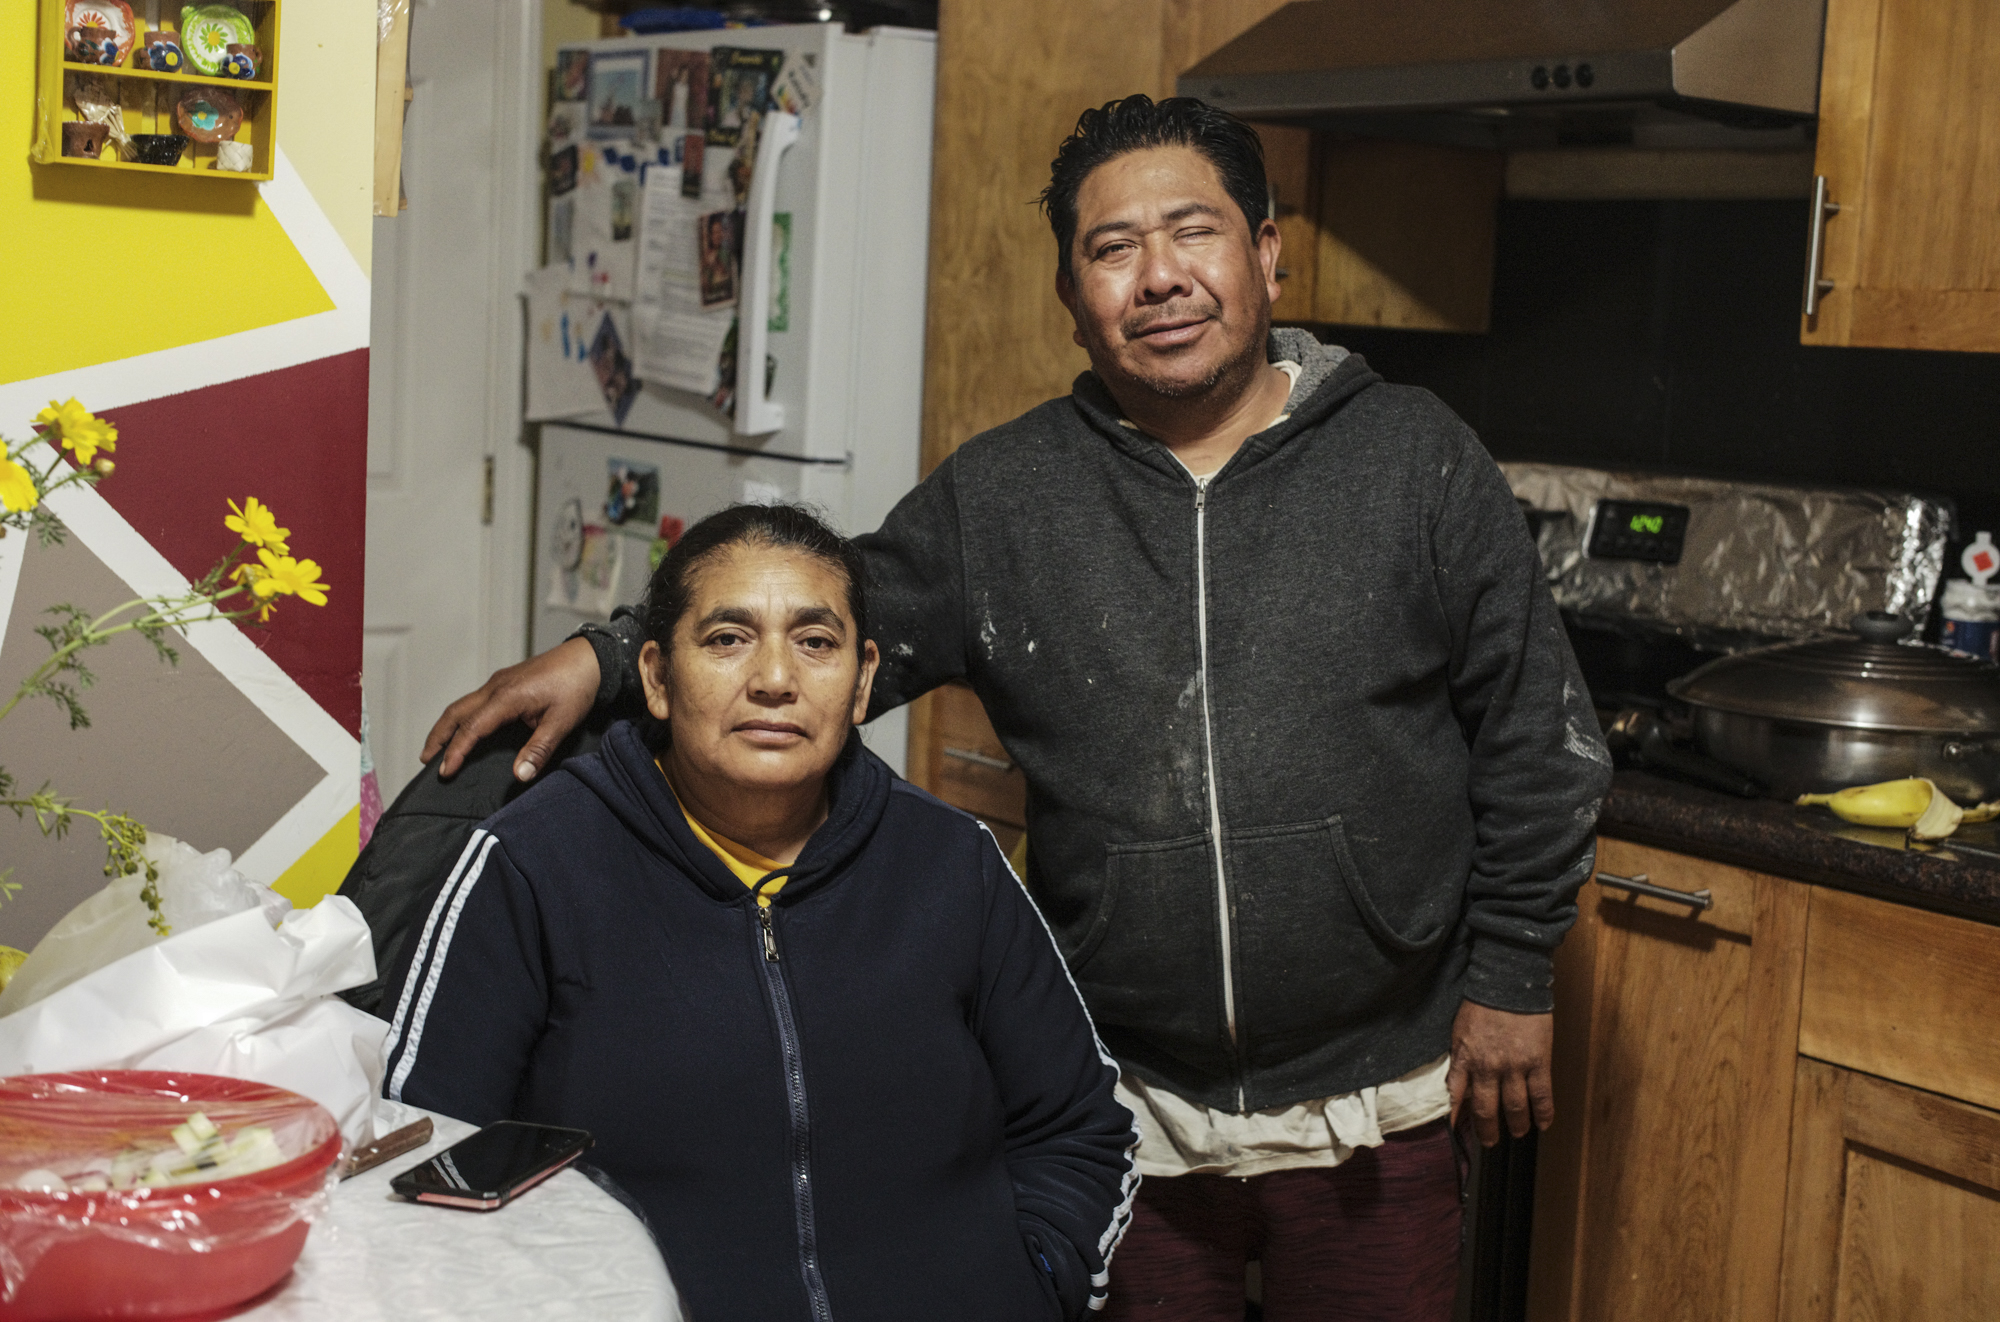 A middle-aged Latinx couple, a woman seated and a man standing with his right arm around her as they both look at the camera in their home kitchen with a refrigerator behind them.